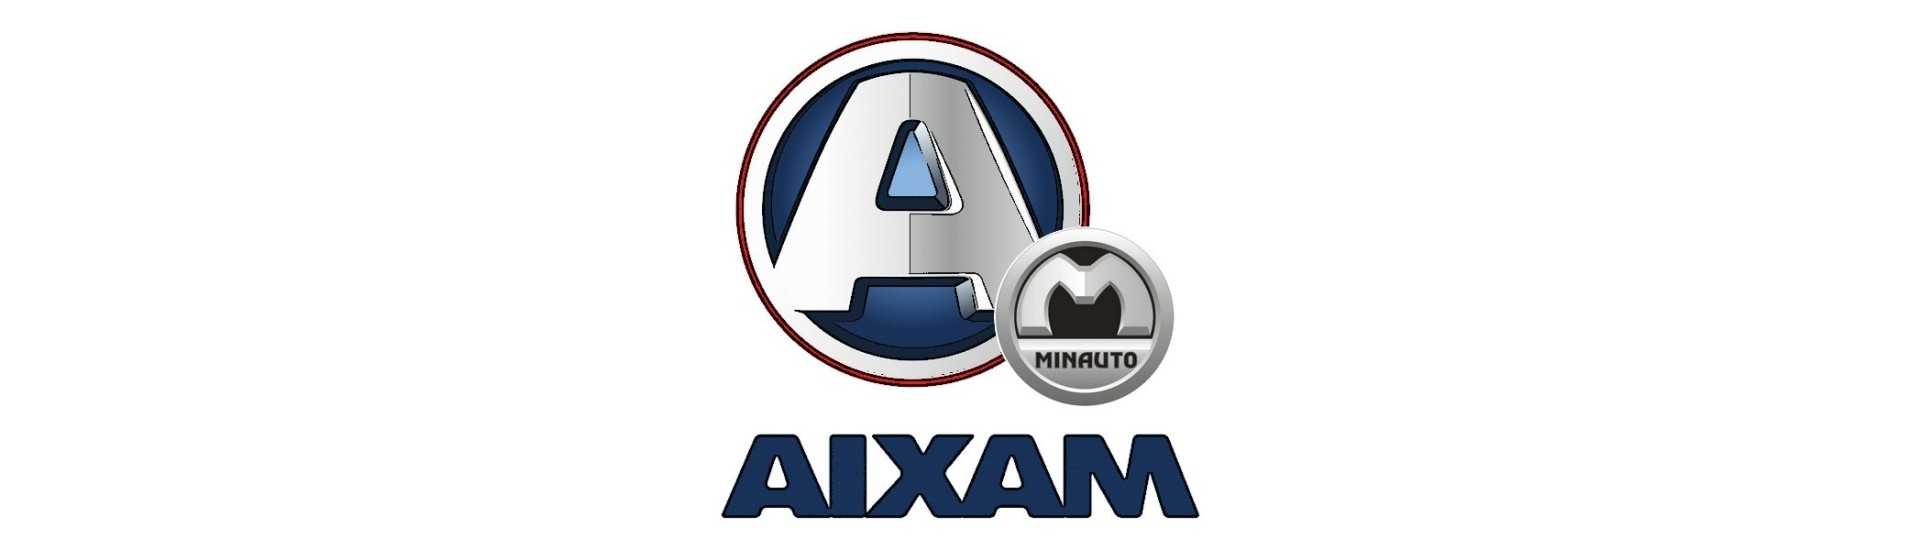 Escape at the best price for car without a permit Aixam Minauto